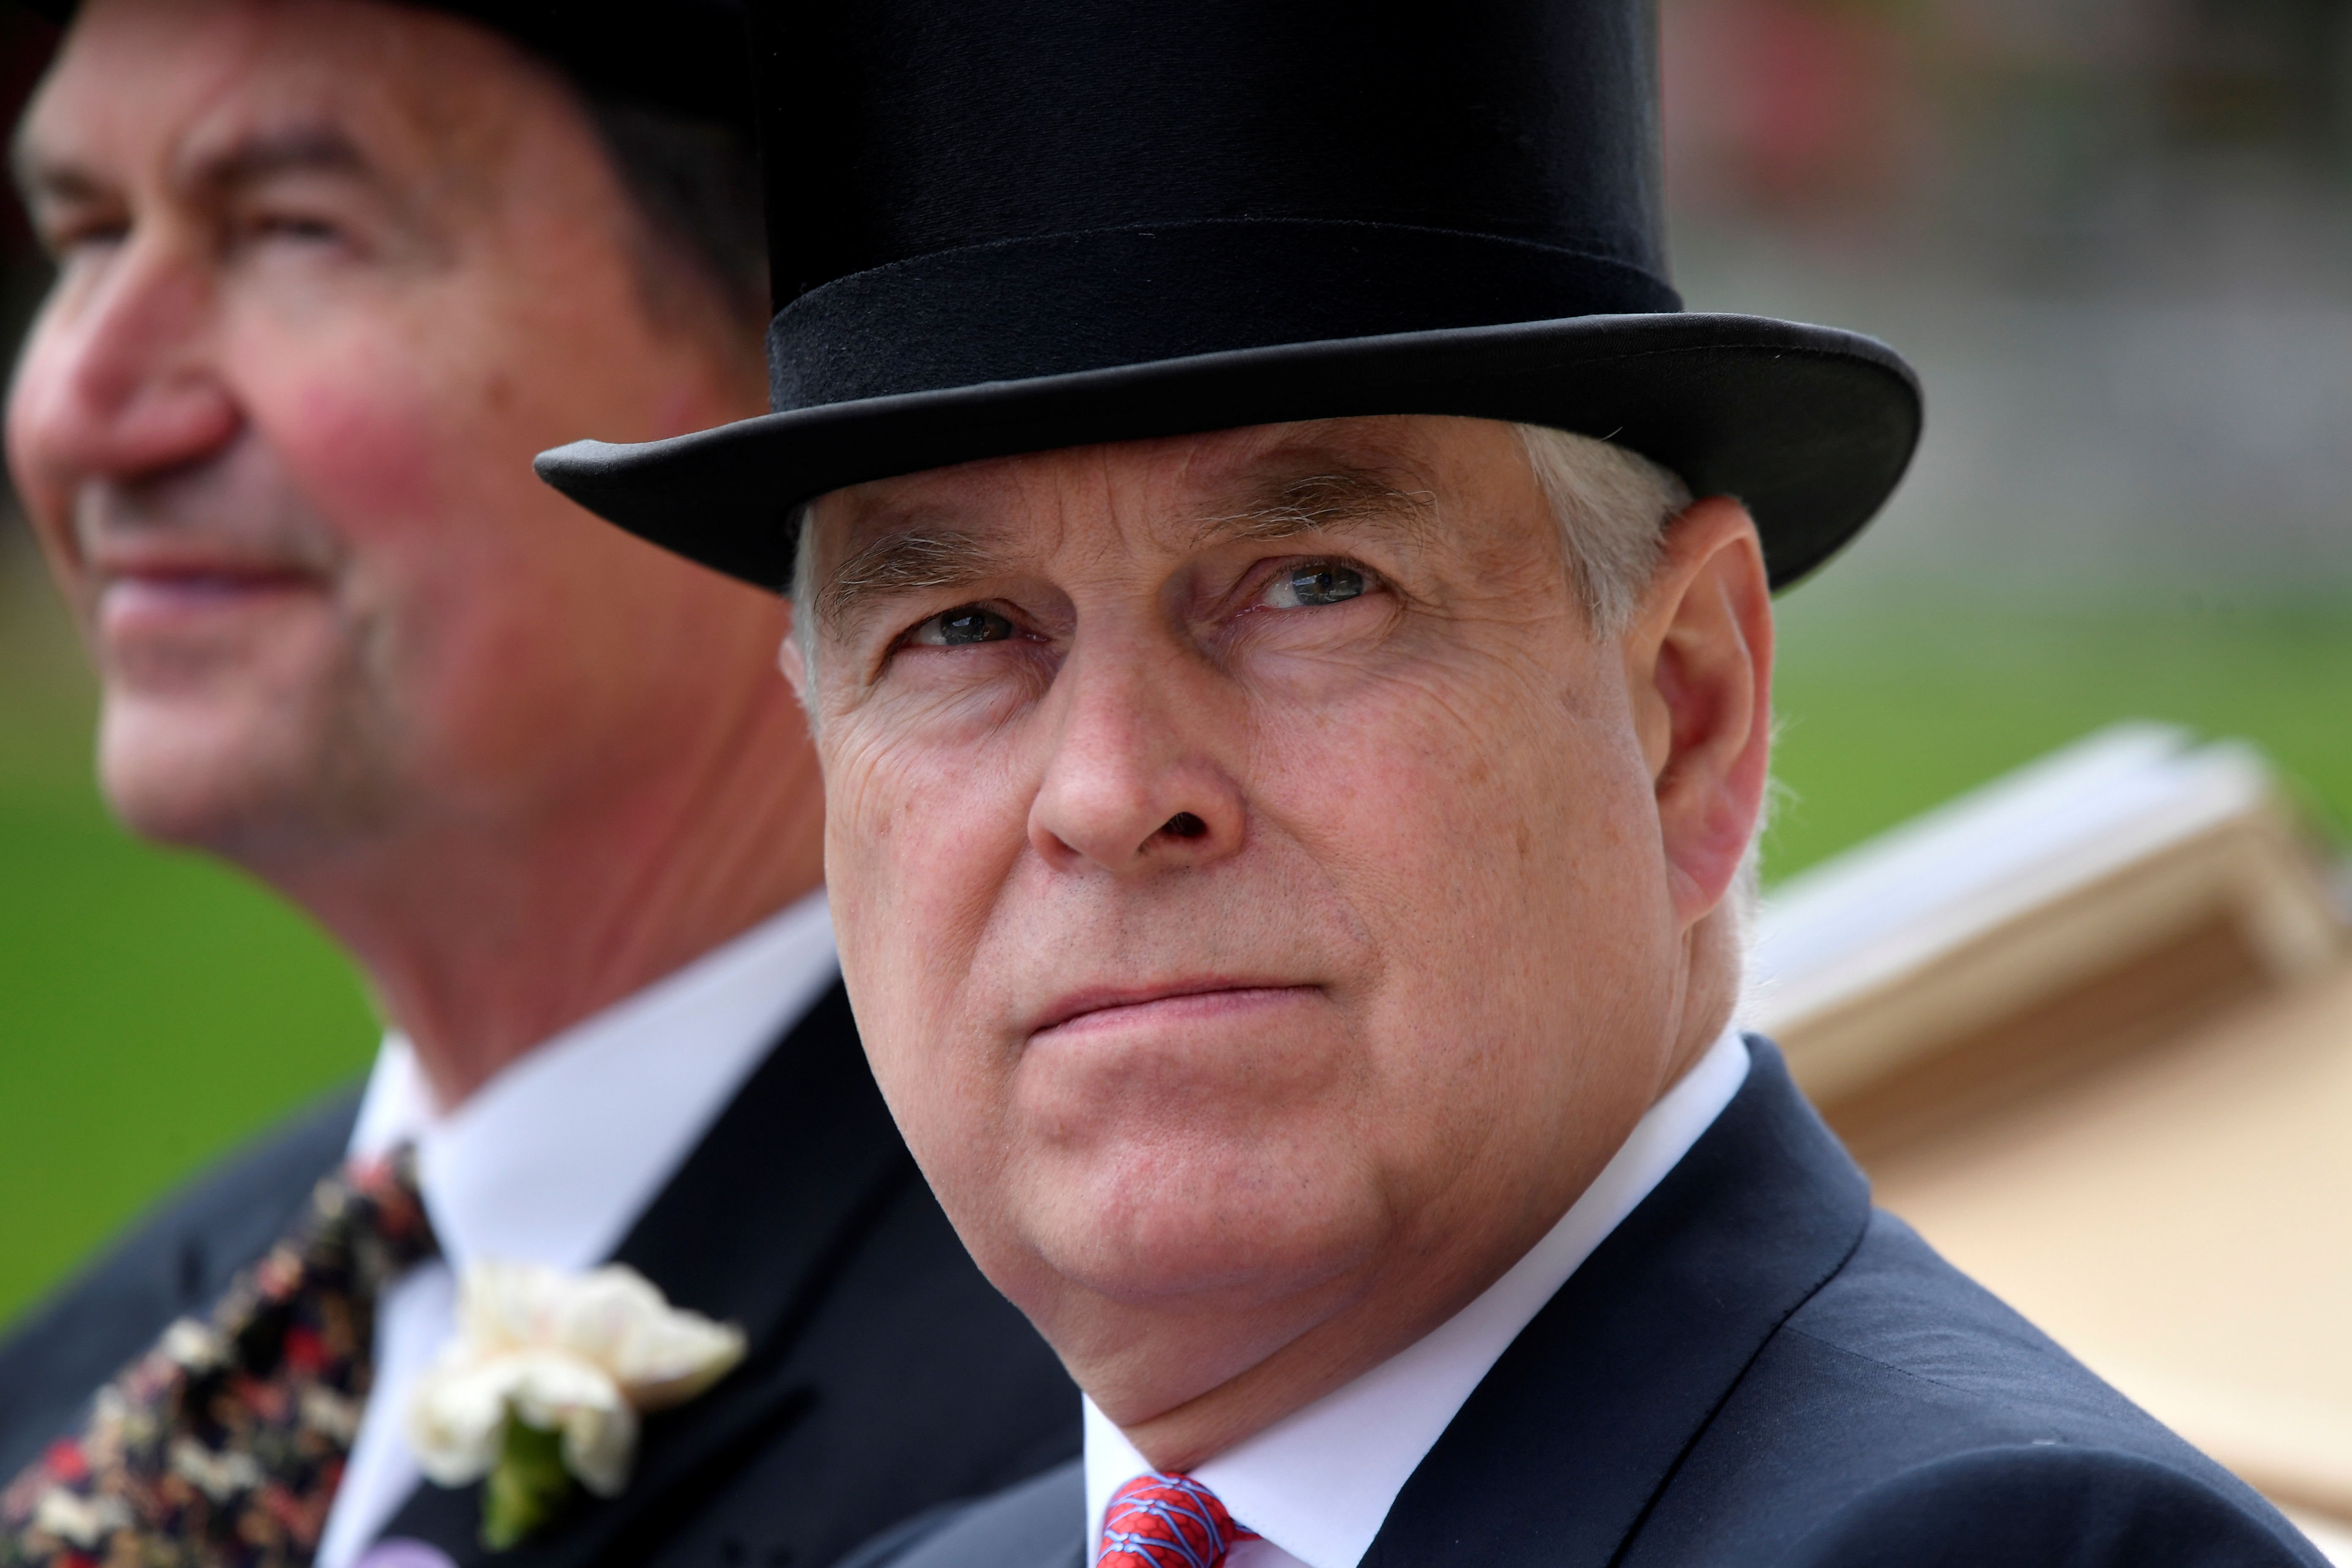 Britain's Prince Andrew arrives by horse and carriage on ladies day REUTERS/Toby Melville 